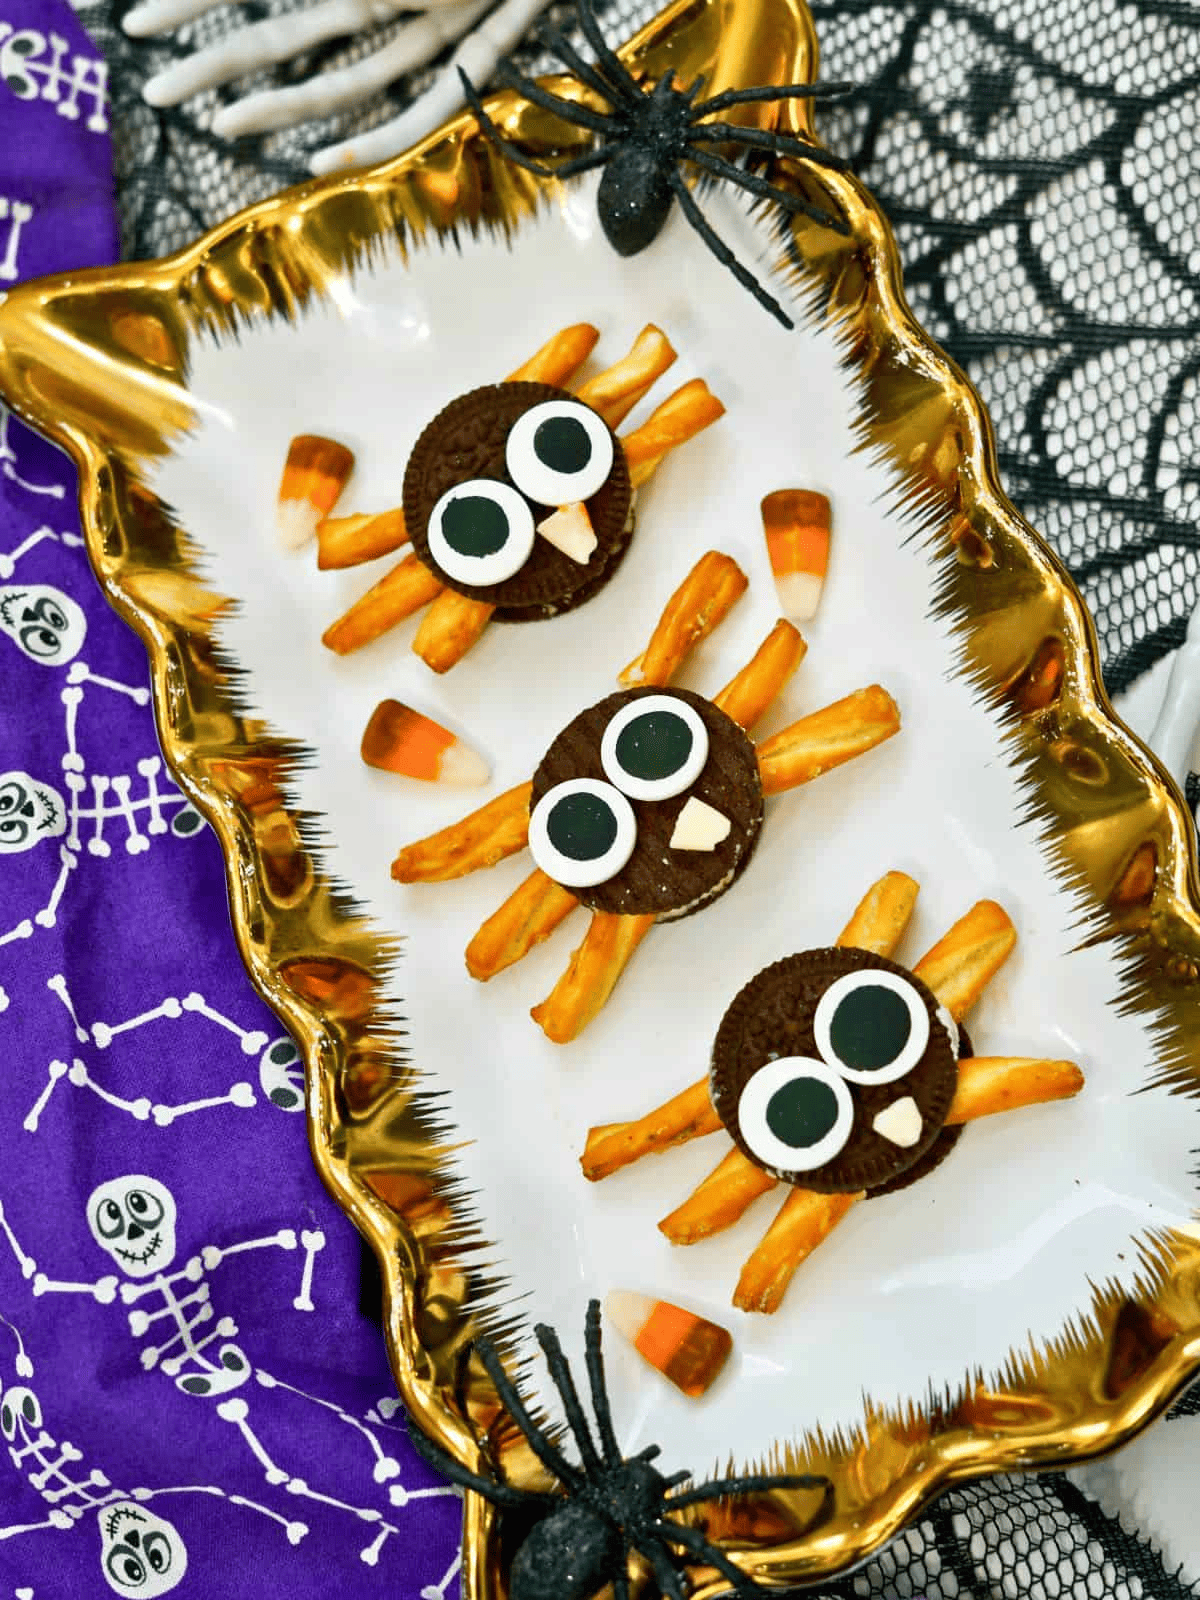 three oreo spider cookies made from oreo cookies and pretzels with candy eyes.